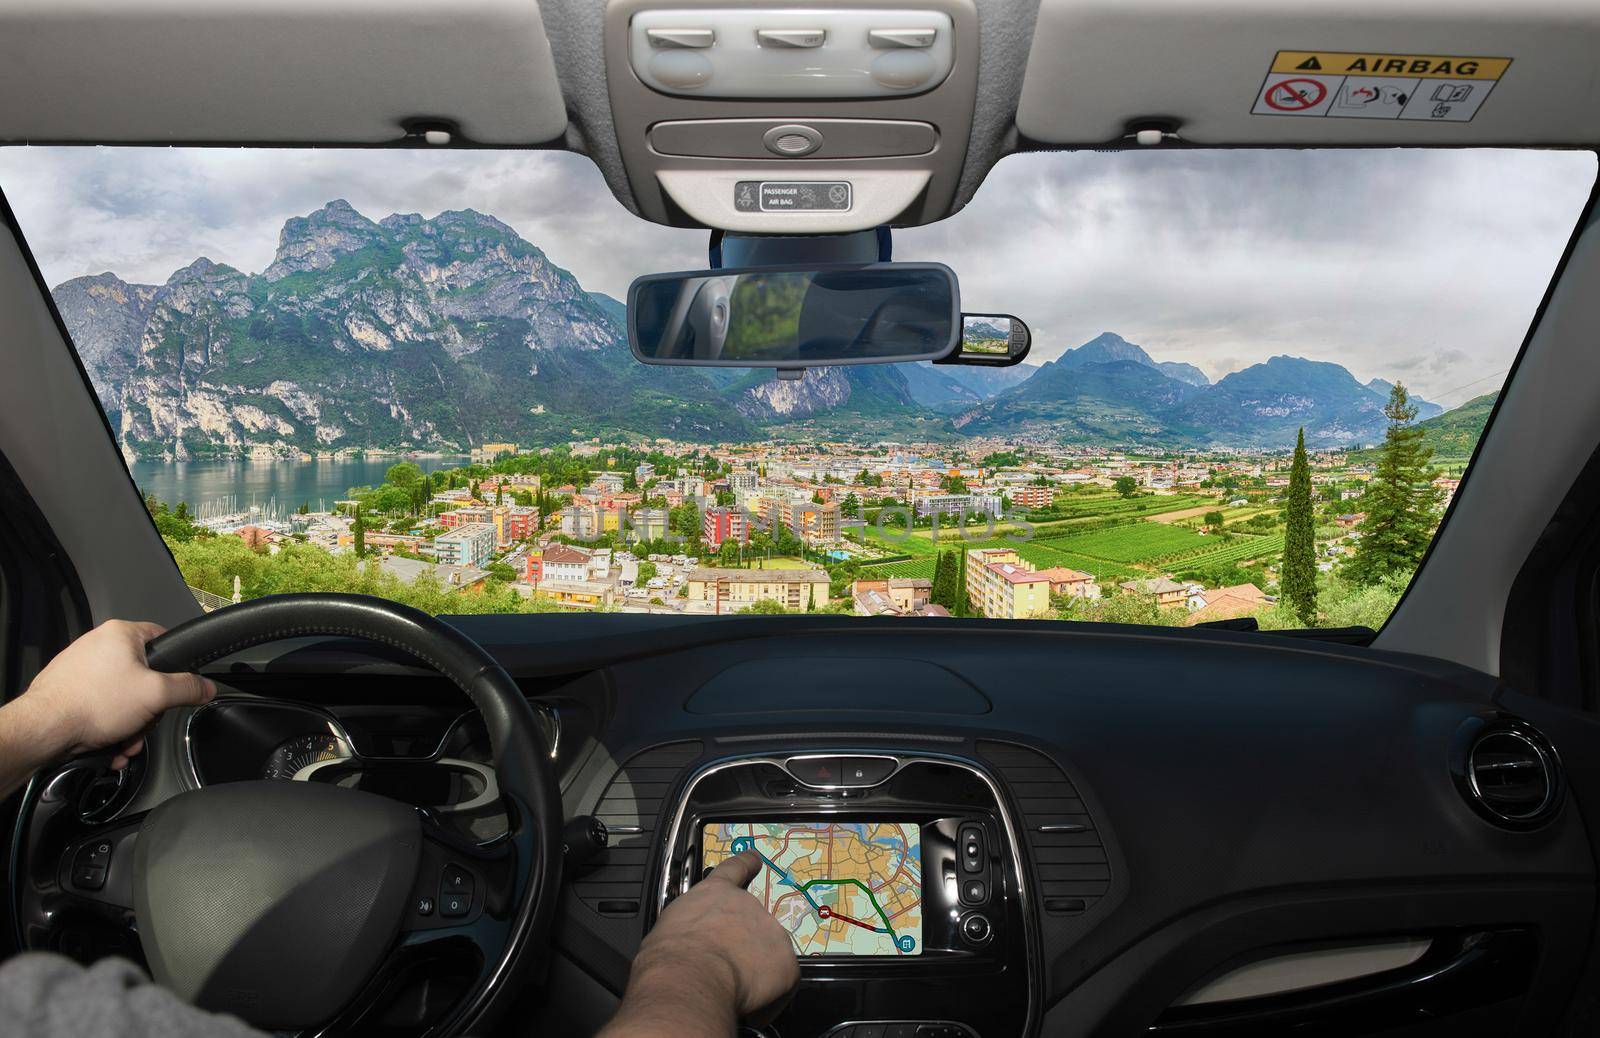 Driving a car while using the touch screen of a GPS navigation system towards Riva del Garda, Northern Lake Garda, Trento, Italy